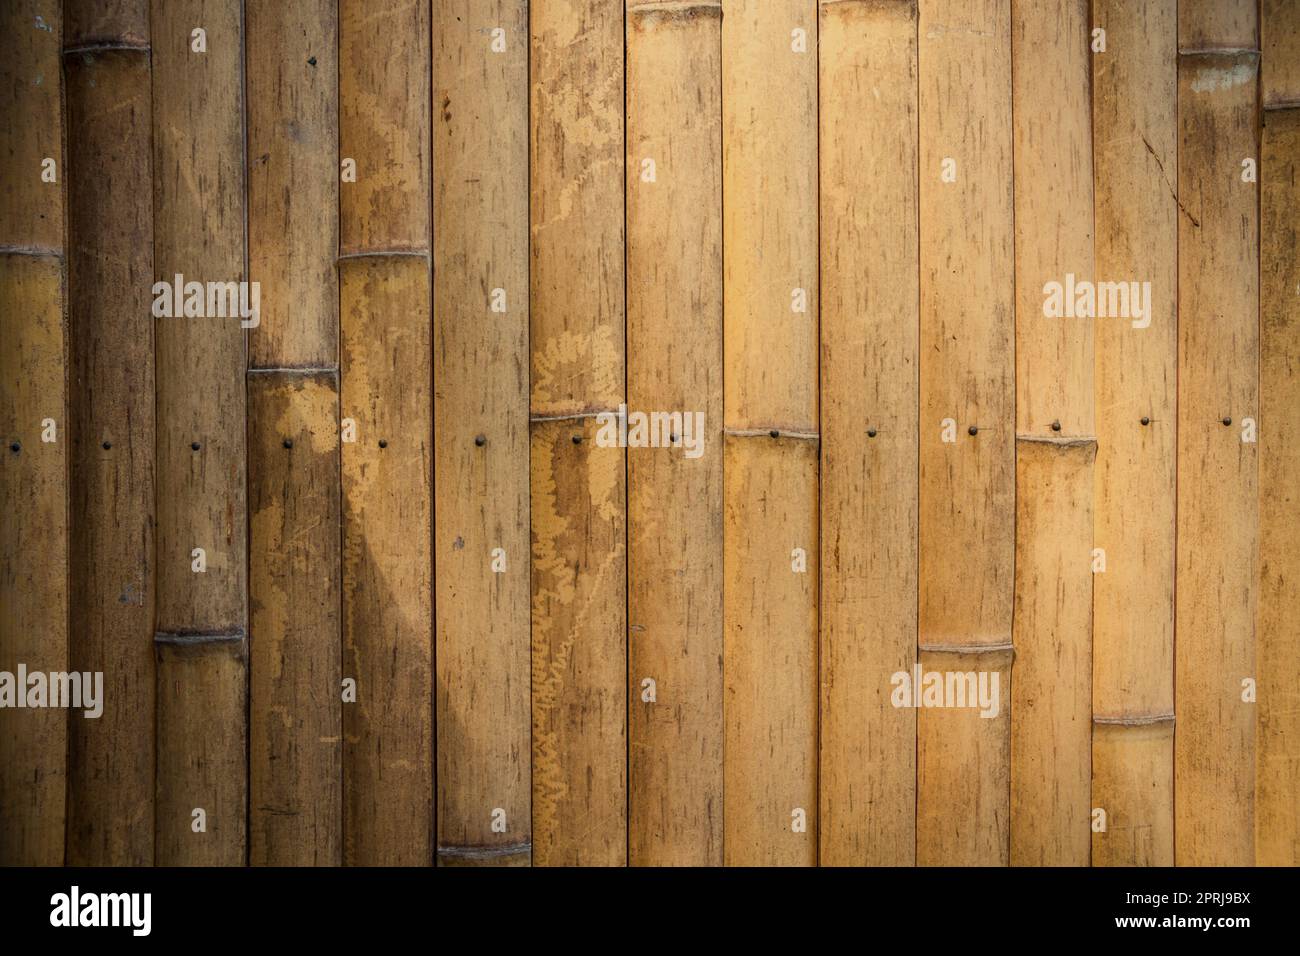 Bamboo wood plank texture for background Stock Photo by ©wirojsid